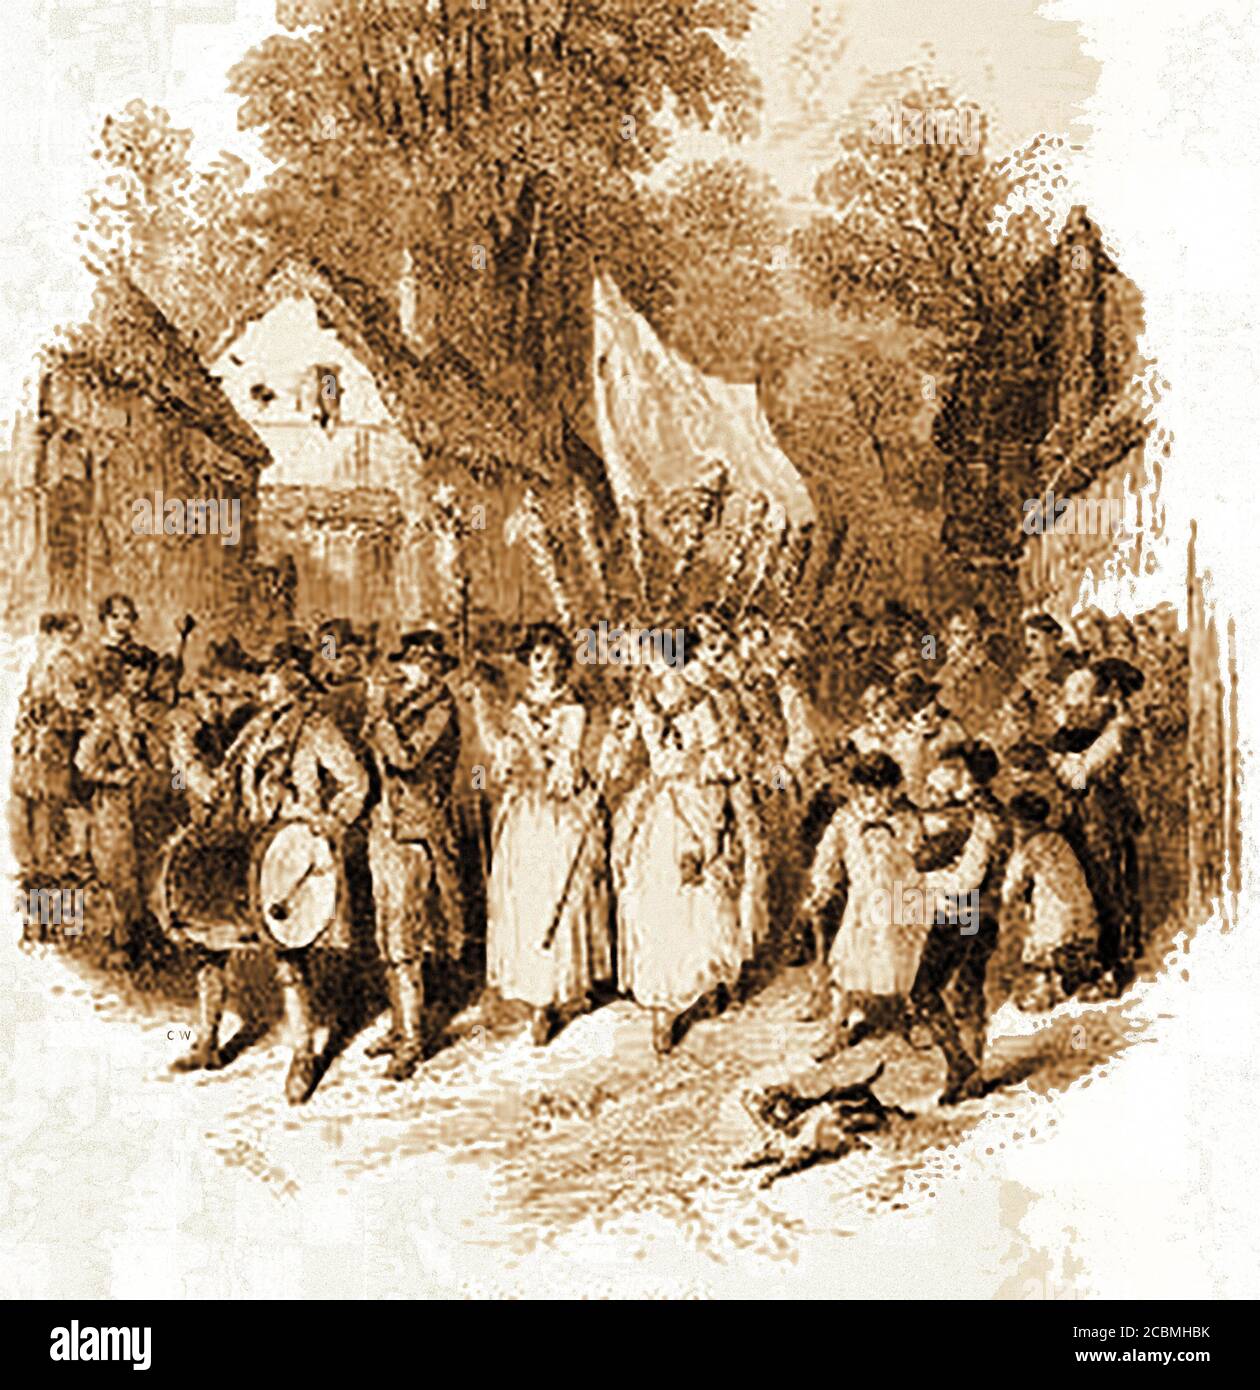 Traditional old British Customs,Festivities and events - A typical British Whitsuntide procession / walk (June) 1845. The holiday originally celebrated  as the birthday of the Christian Church but became generally celebrated as an annual festivity. Whitsuntide is the week following Whitsunday and the eighth week following Easter. Stock Photo